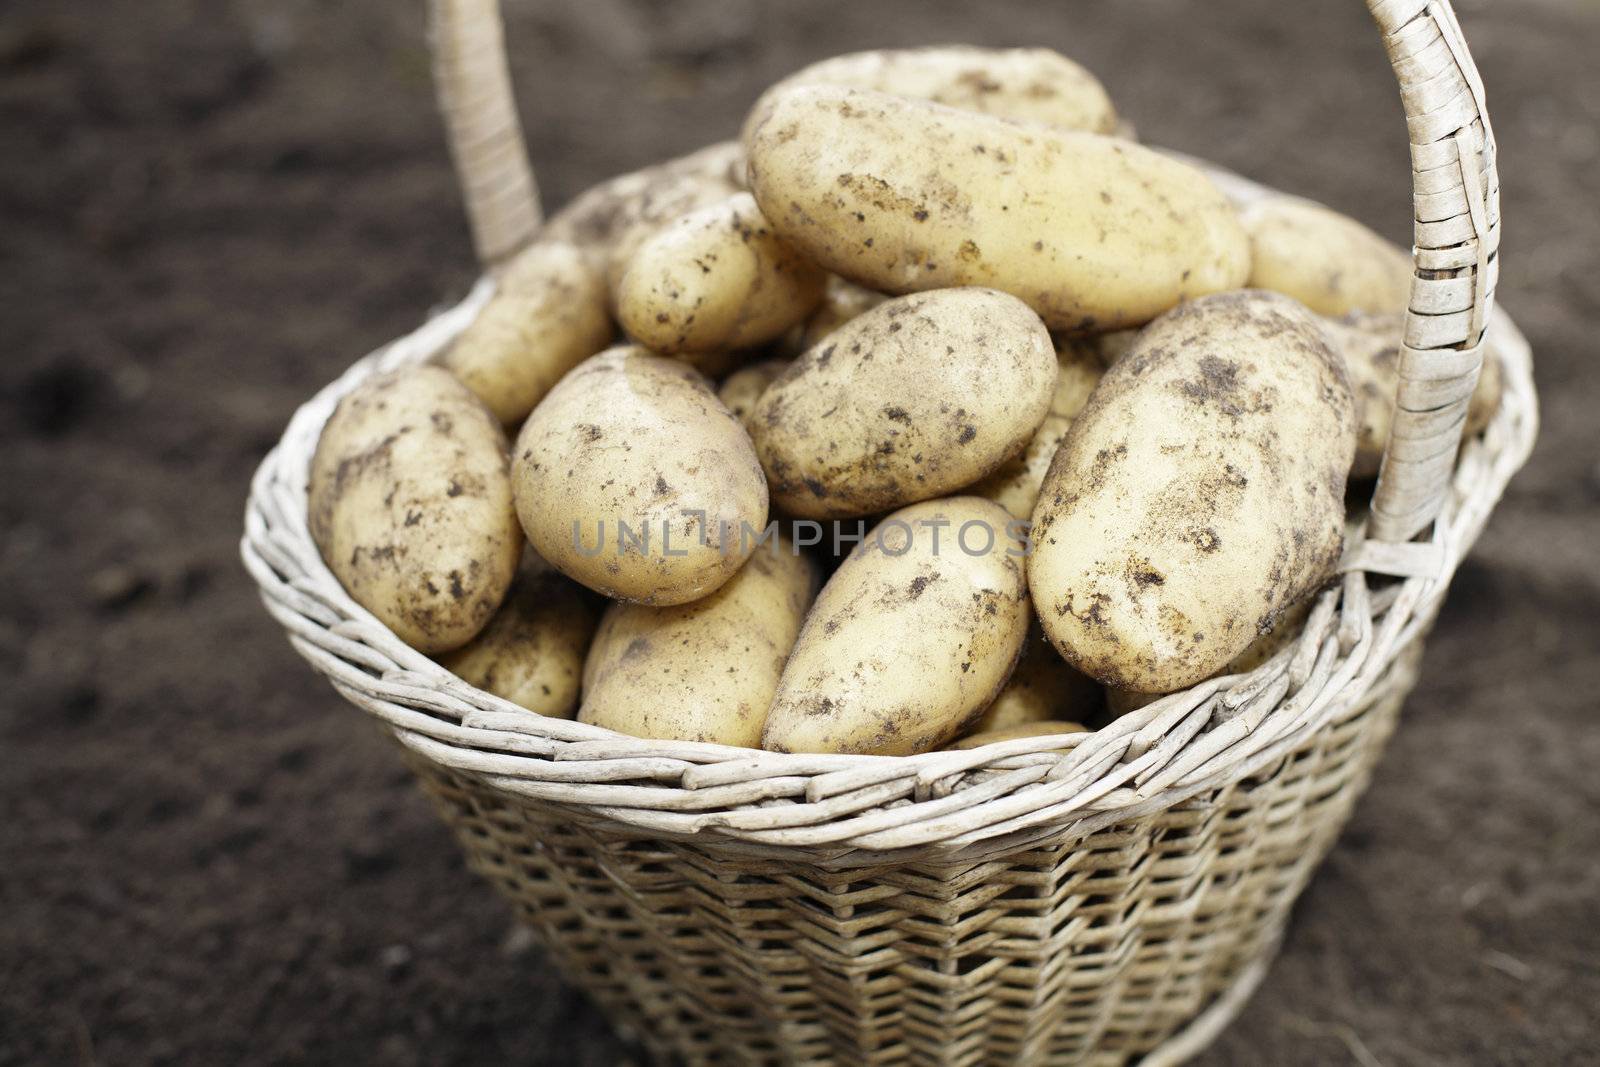 Dirty potatoes in an old woven basket